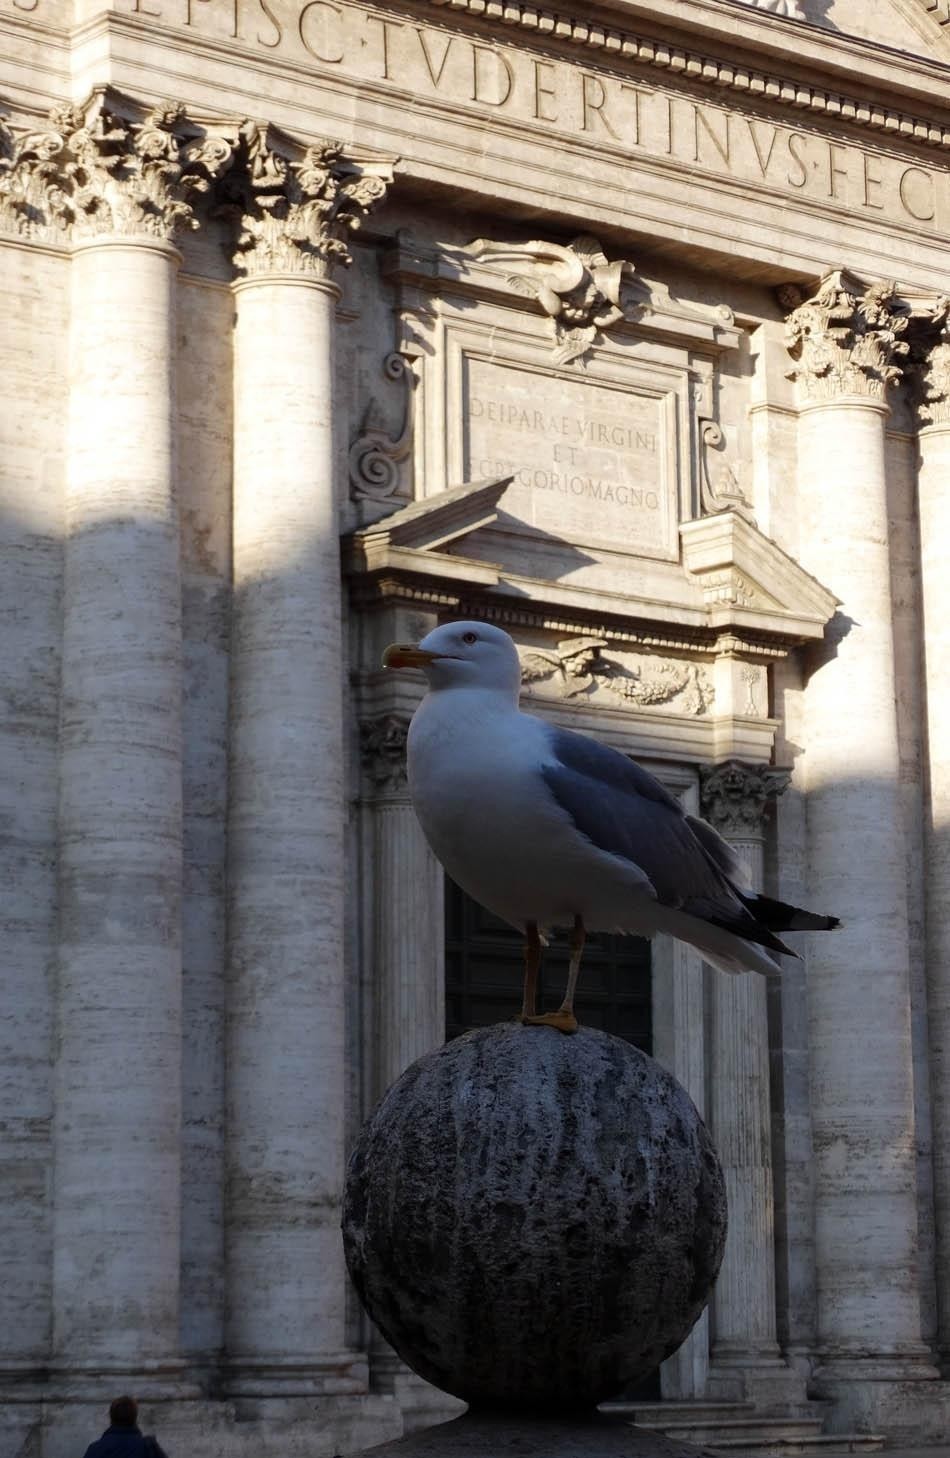 Pigeon at Piazza della Chiesa Nuova, Rome | What to do in a rainy day in Rome - the Eternal City1